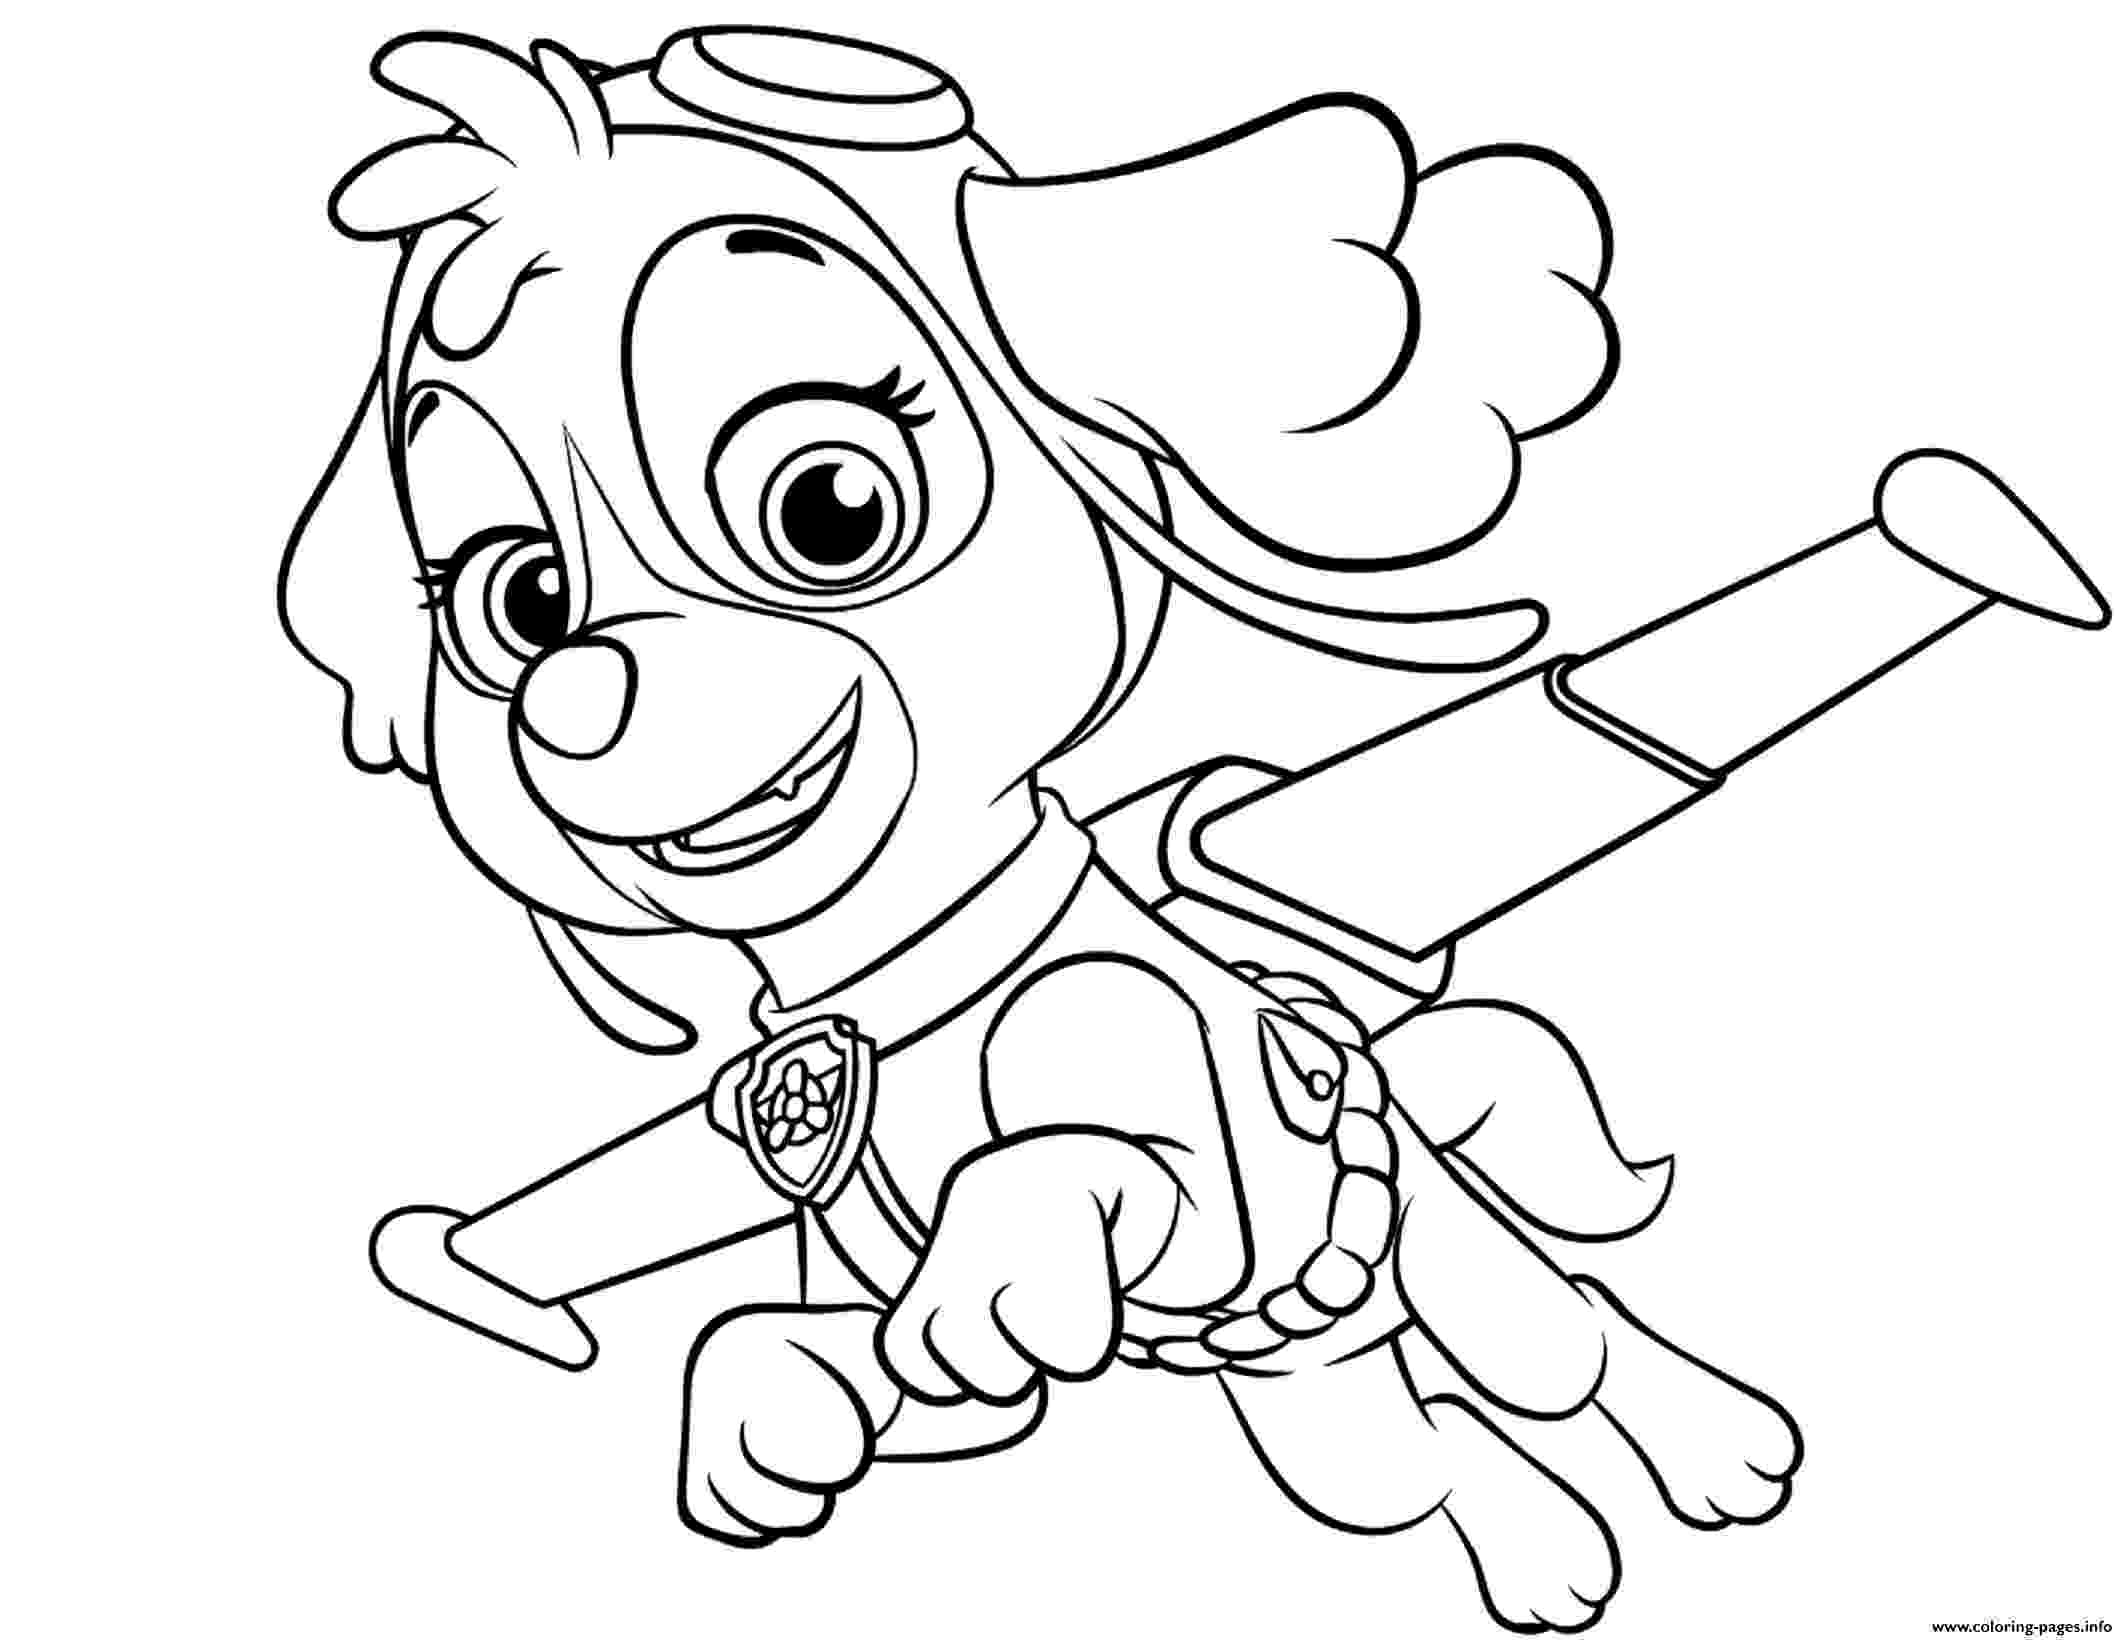 free printable paw patrol christmas coloring pages paw patrol coloring pages best coloring pages for kids christmas printable patrol coloring free paw pages 